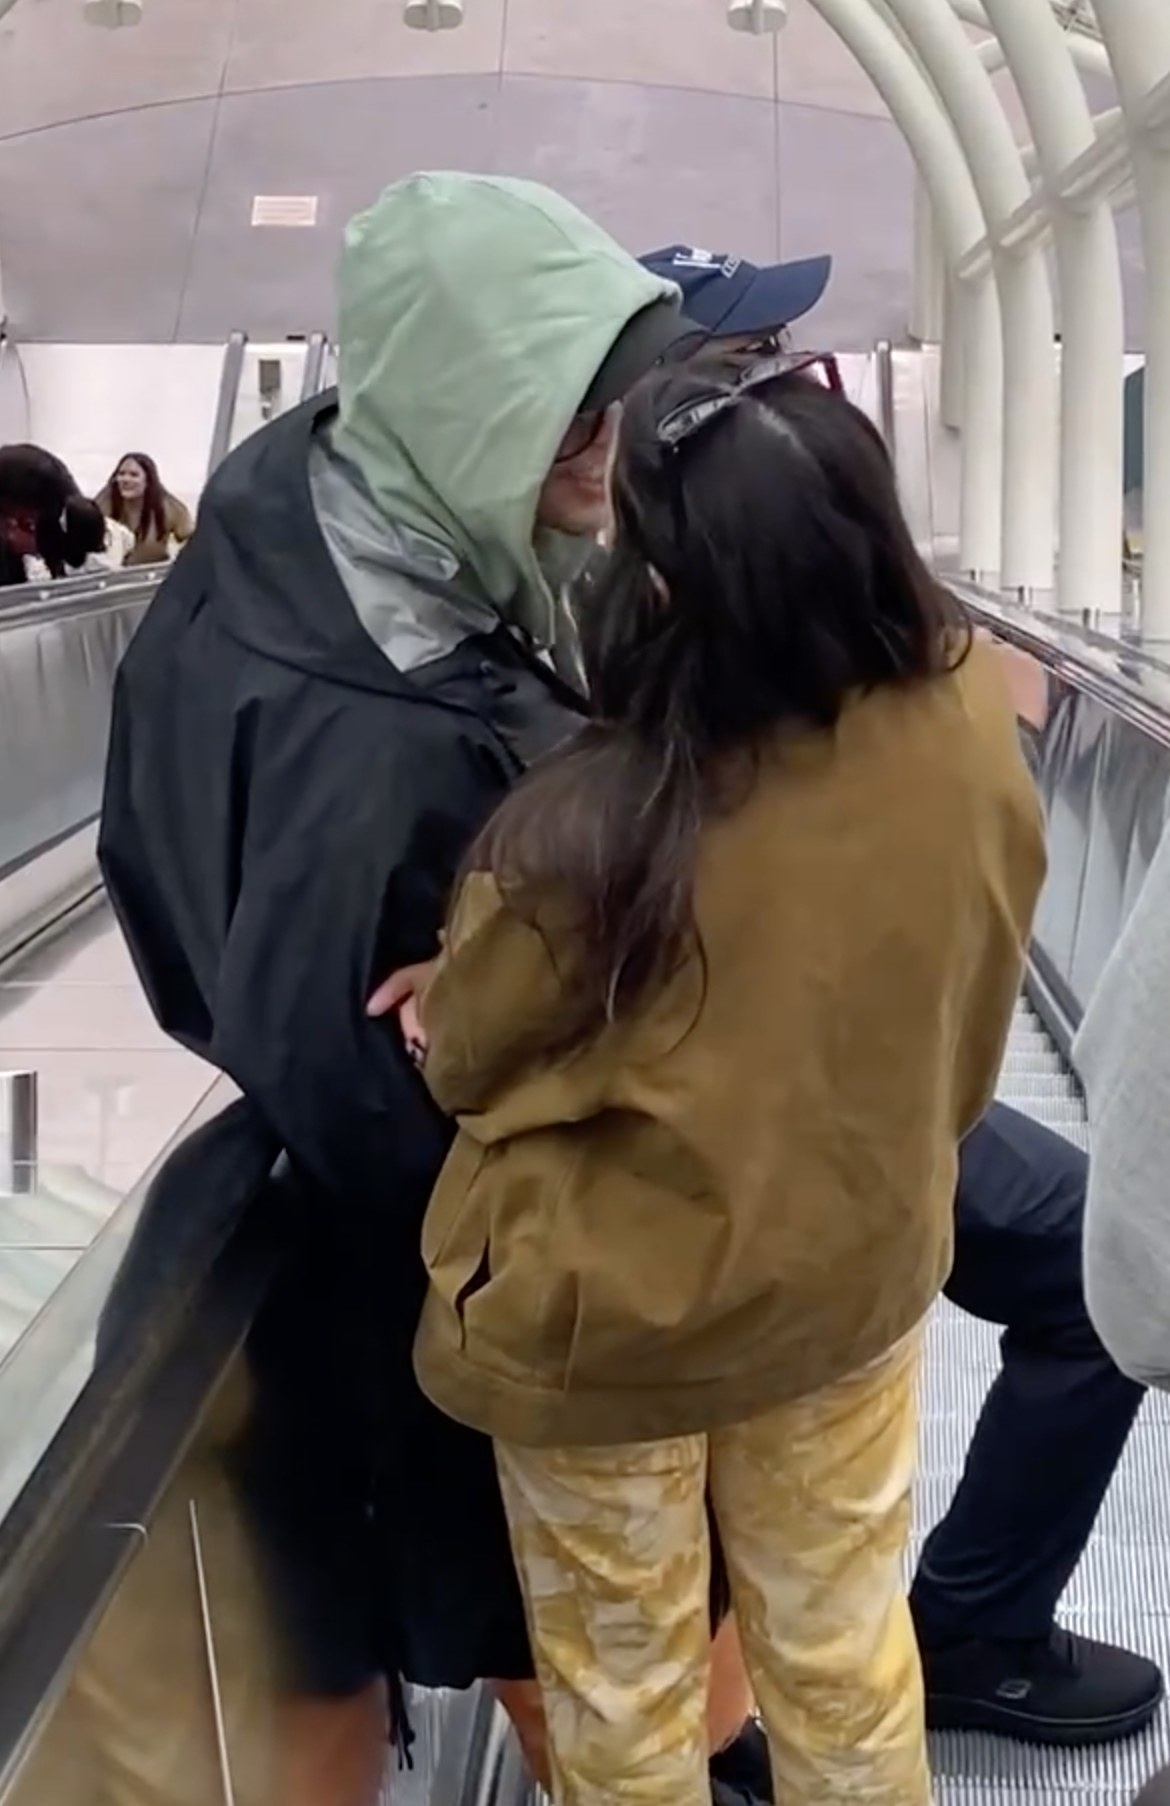 the pair cozying up on the escalator